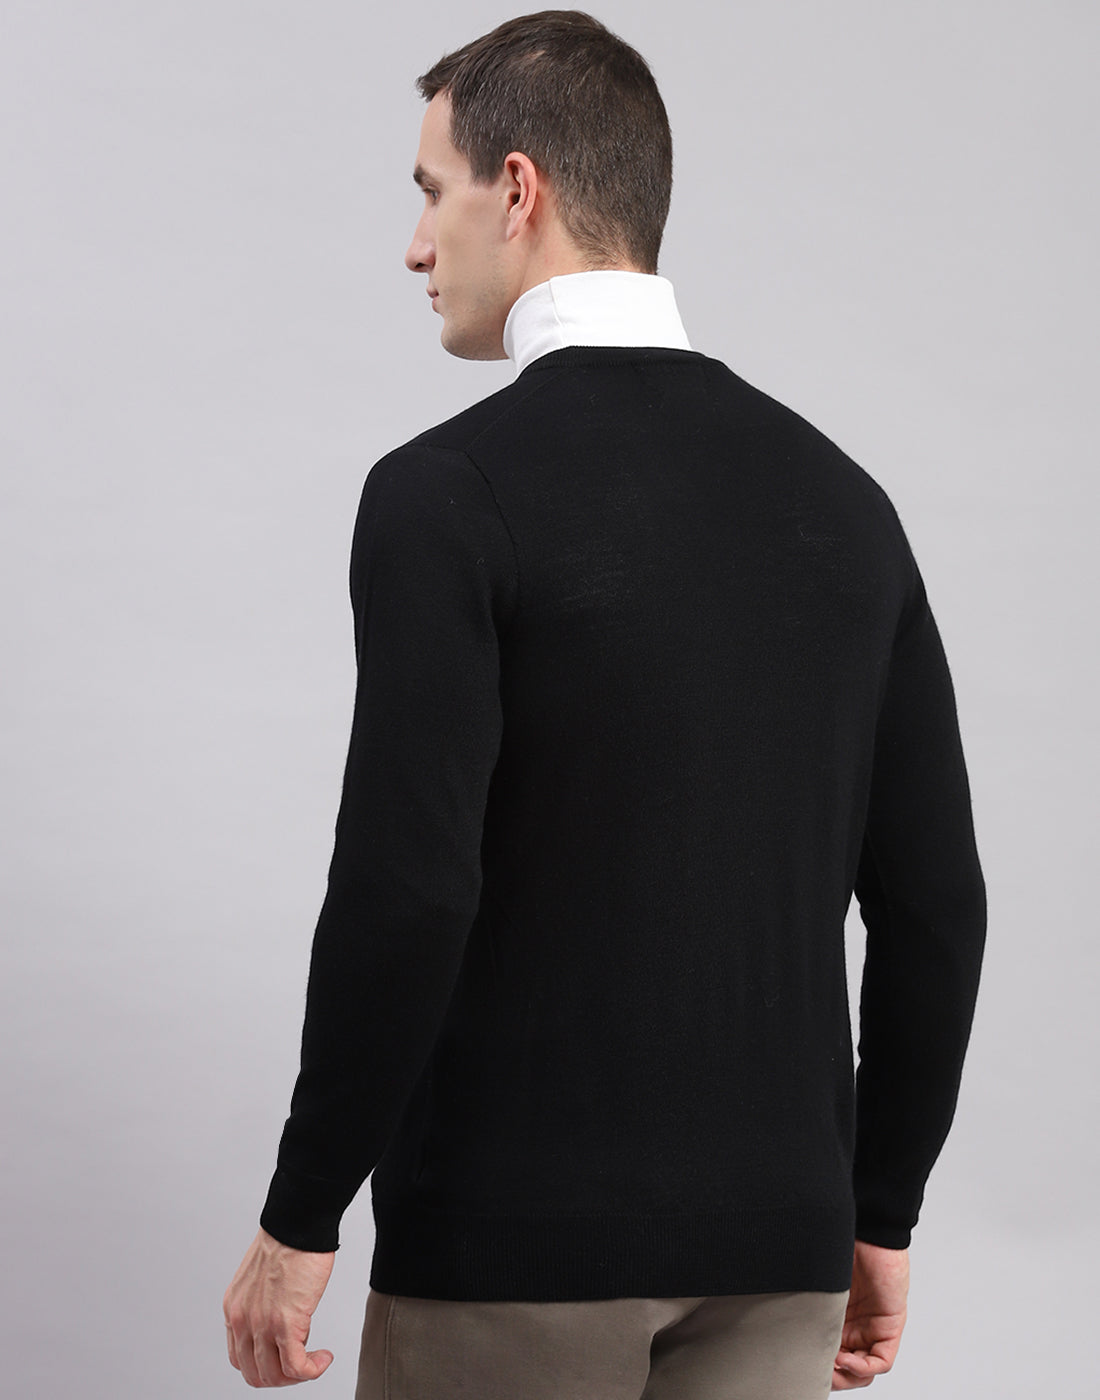 Men Black Solid V Neck Full Sleeve Sweaters/Pullovers